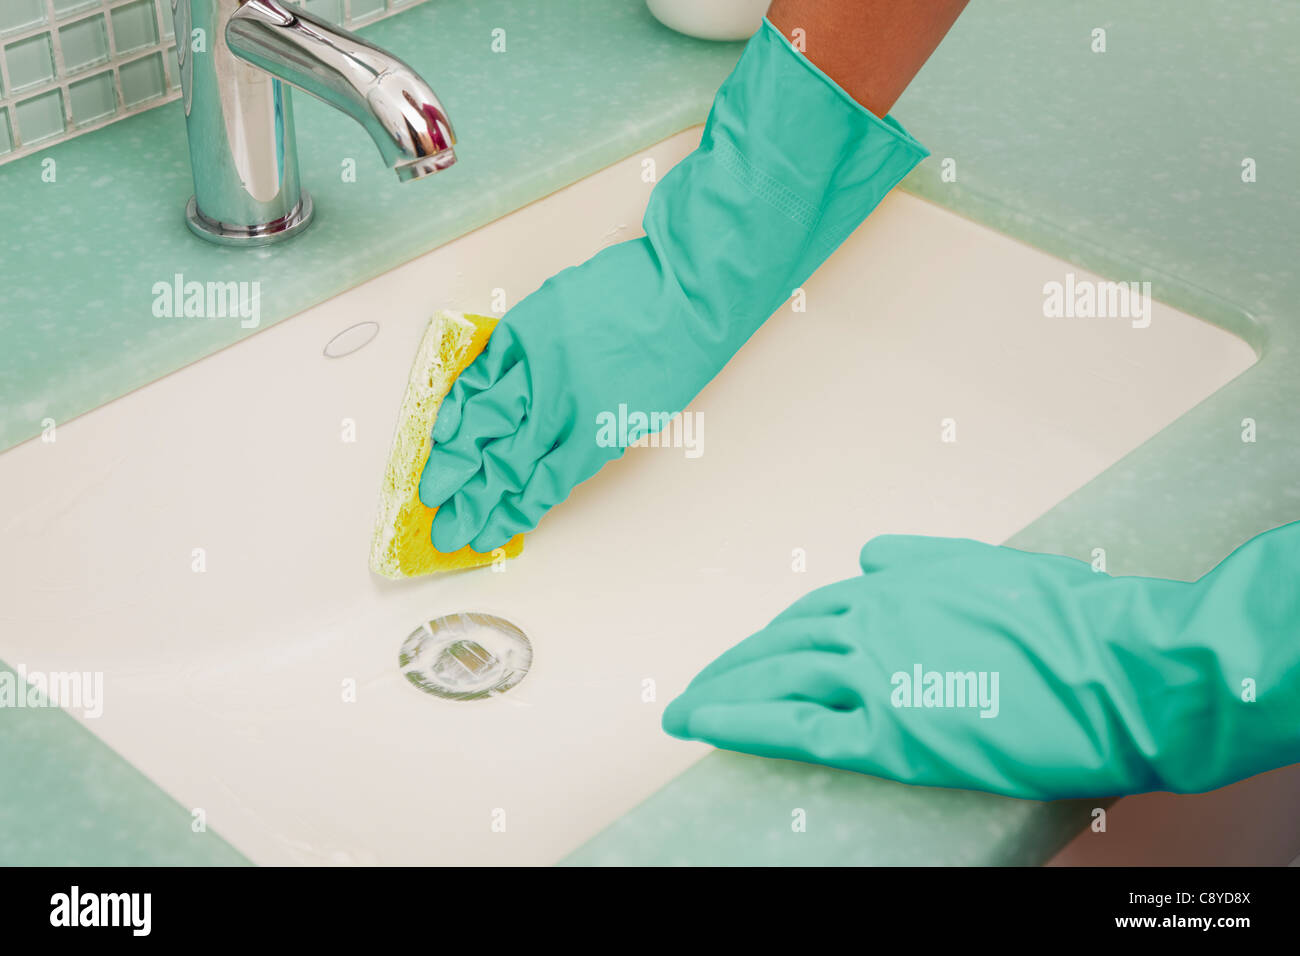 USA, Illinois, Metamora, Close-up of woman in rubber gloves cleaning bathroom sink Stock Photo